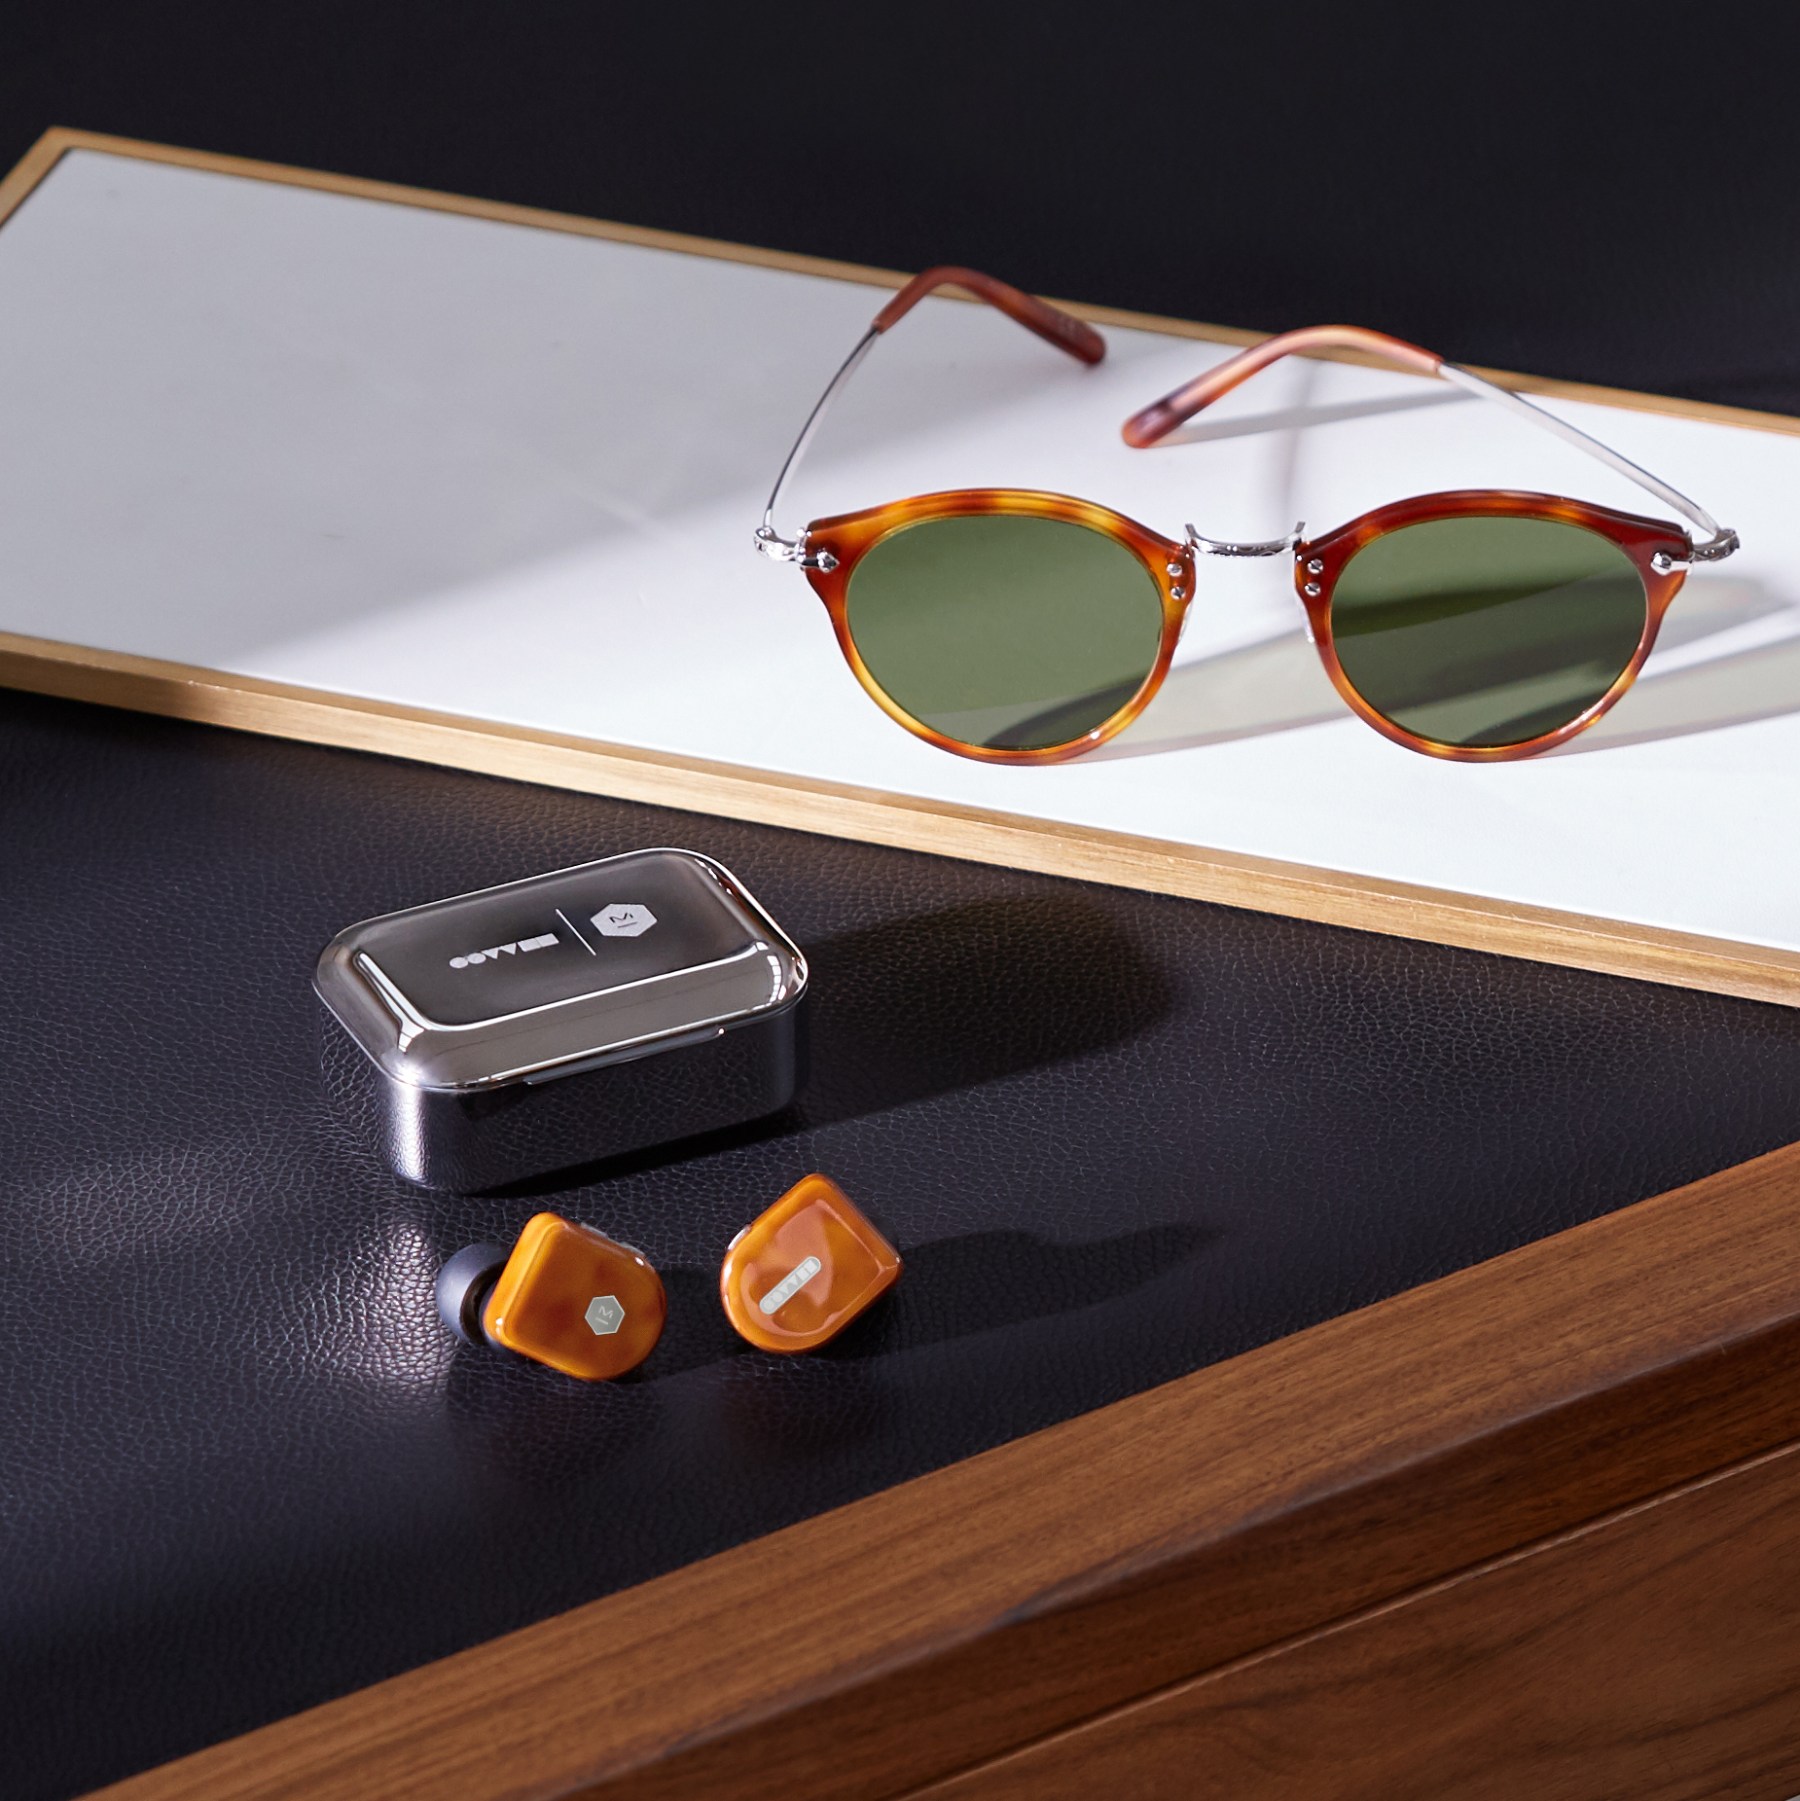 MW07 PLUS and the OP-505 Sunglasses in LBR Acetate